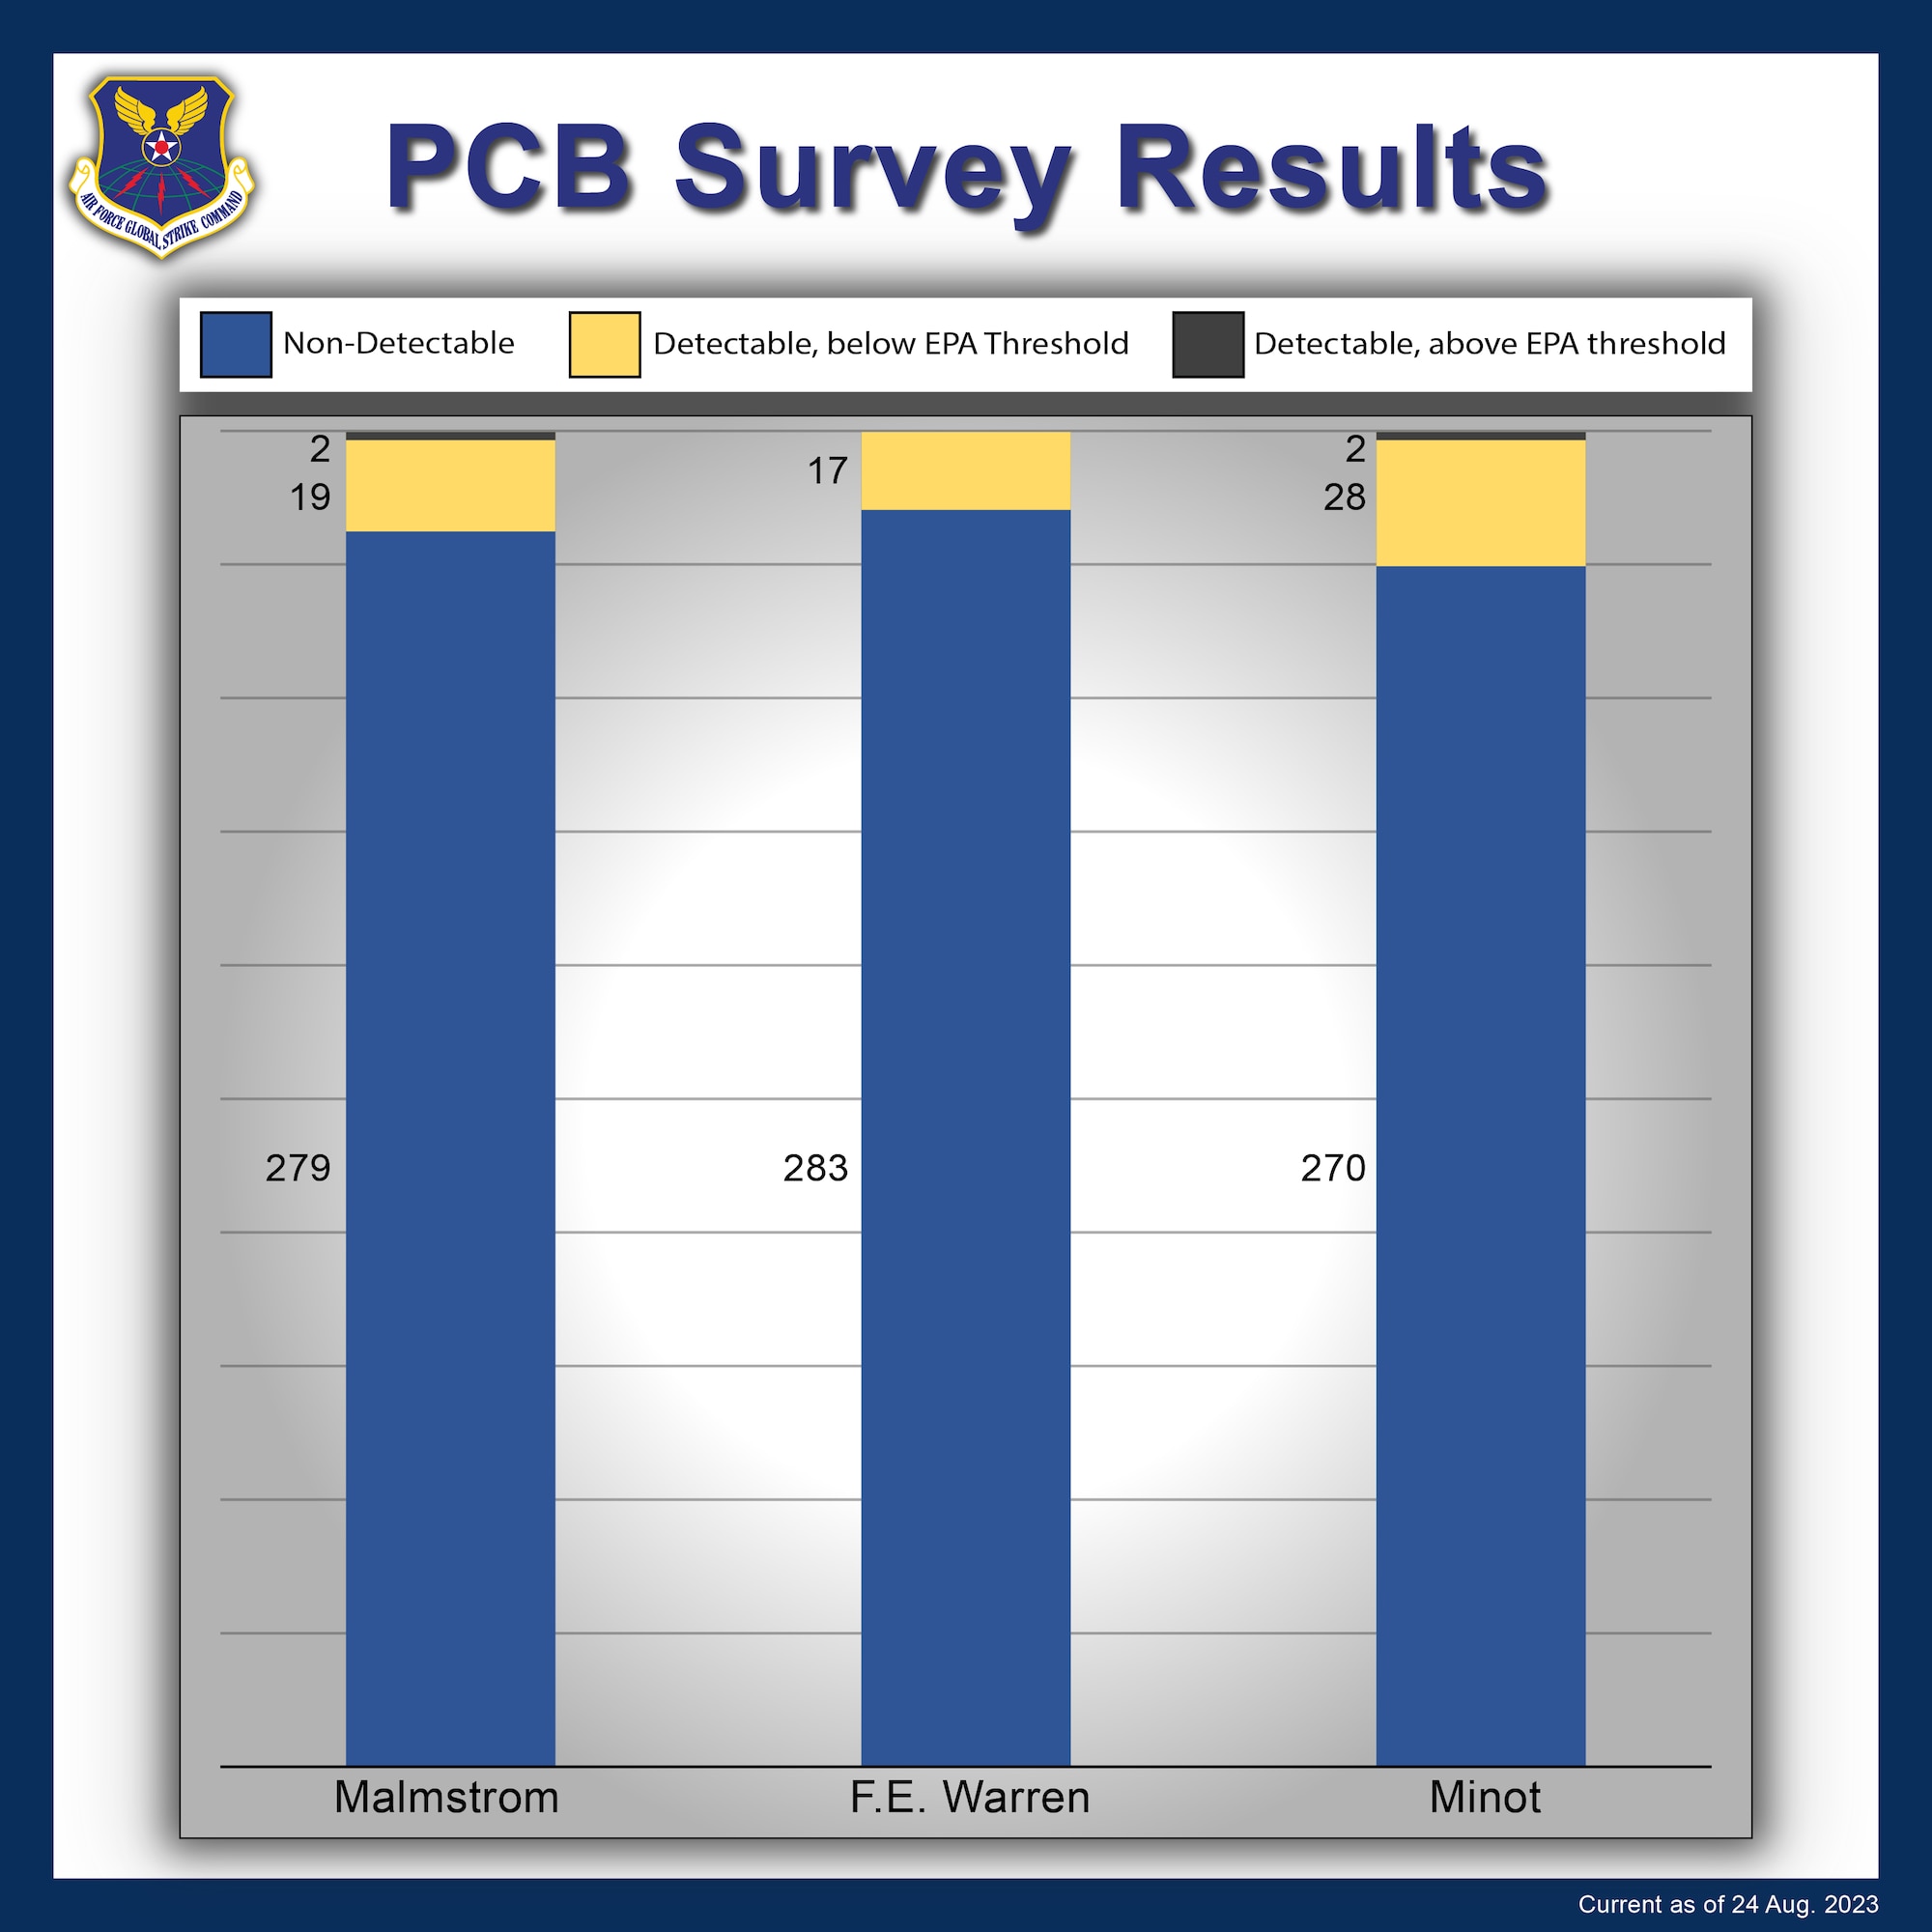 A graphic depicting 3 different bar graphs for the PCB survey results from the initial release. From left to right, the first bar graph shows results from Malmstrom AFB, with 279 non-detectable, 19 detectable but below EPA threshold, and 2 detectable and above EPA threshold. The second bar graph shows F.E. Warren AFB results with 283 non-detectable and 17 detectable but below EPA threshold. The last bar graph shows results for Minot AFB, with 270 non-detectable, 28 detectable but below EPA threshold, and 2 detectable and above EPA threshold.